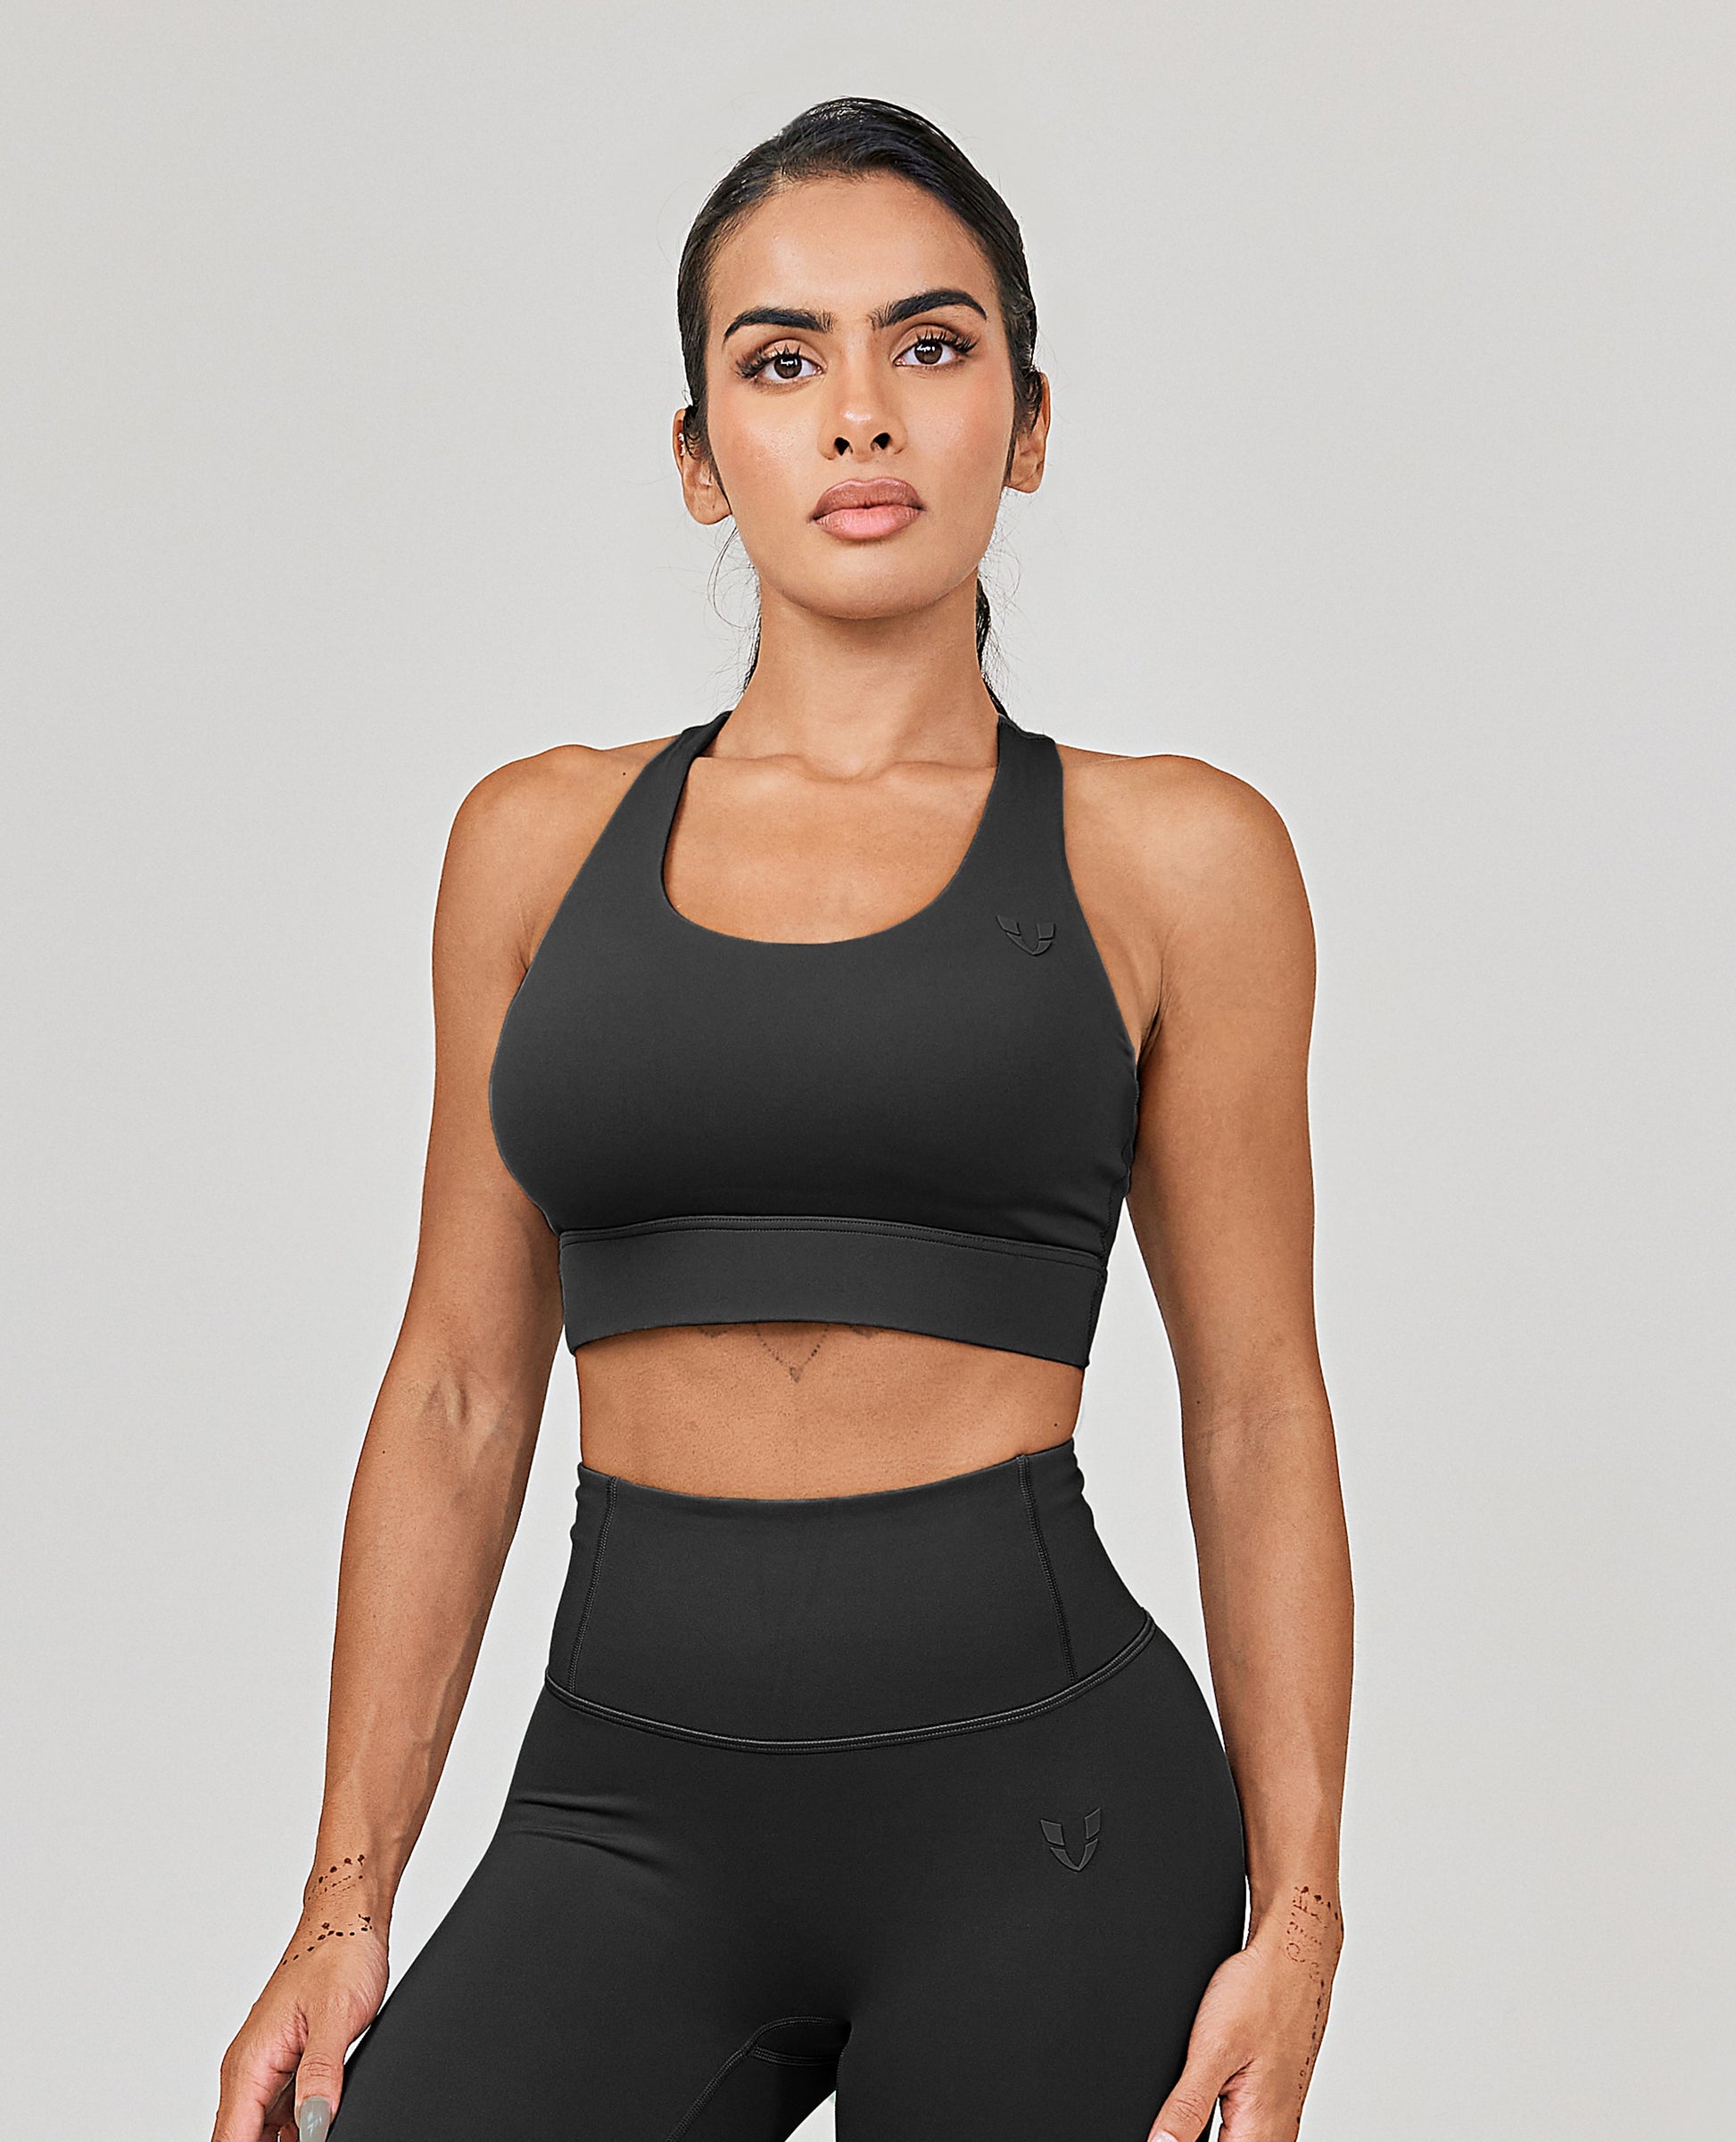 FIRM ABS: Everything You Need To Know About The Sports Bra!